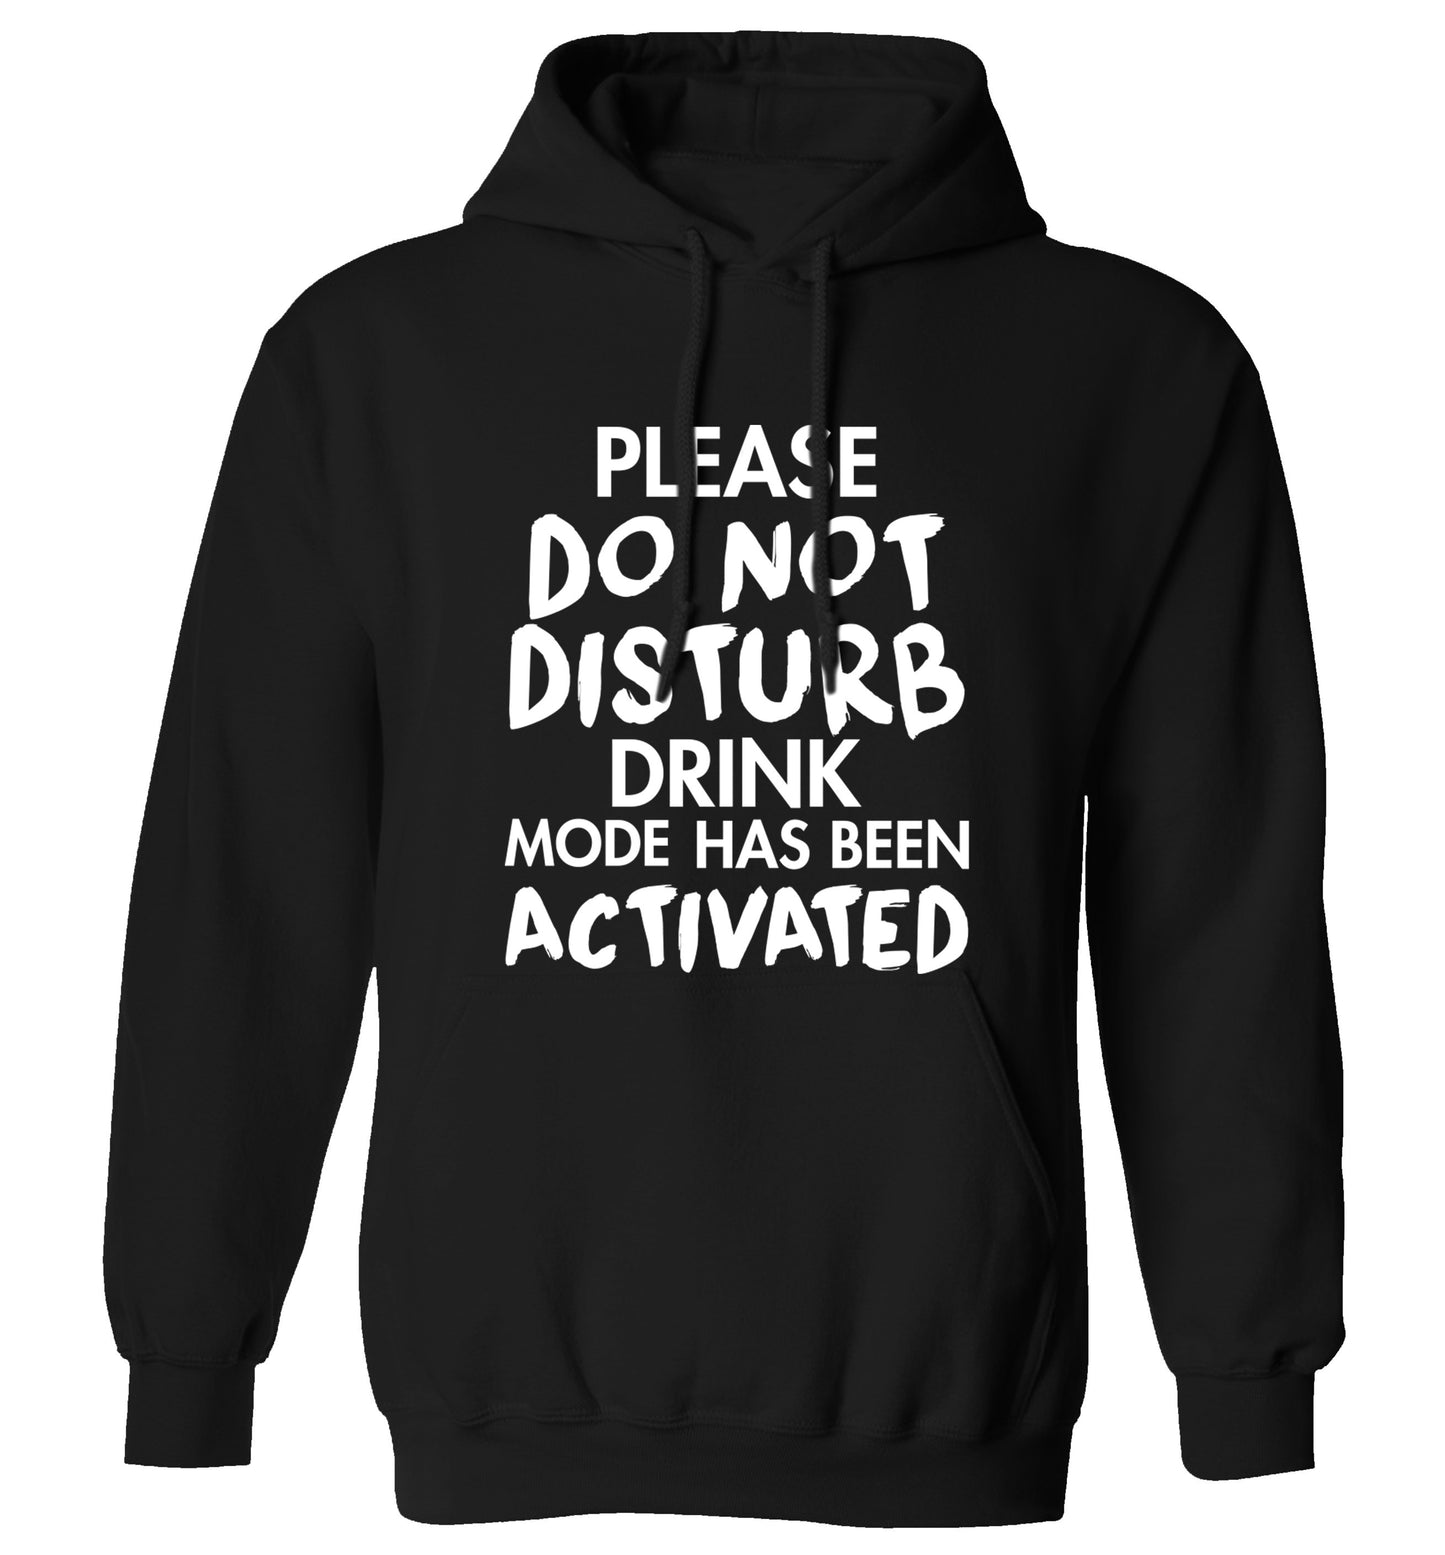 Please do not disturb drink mode has been activated adults unisex black hoodie 2XL